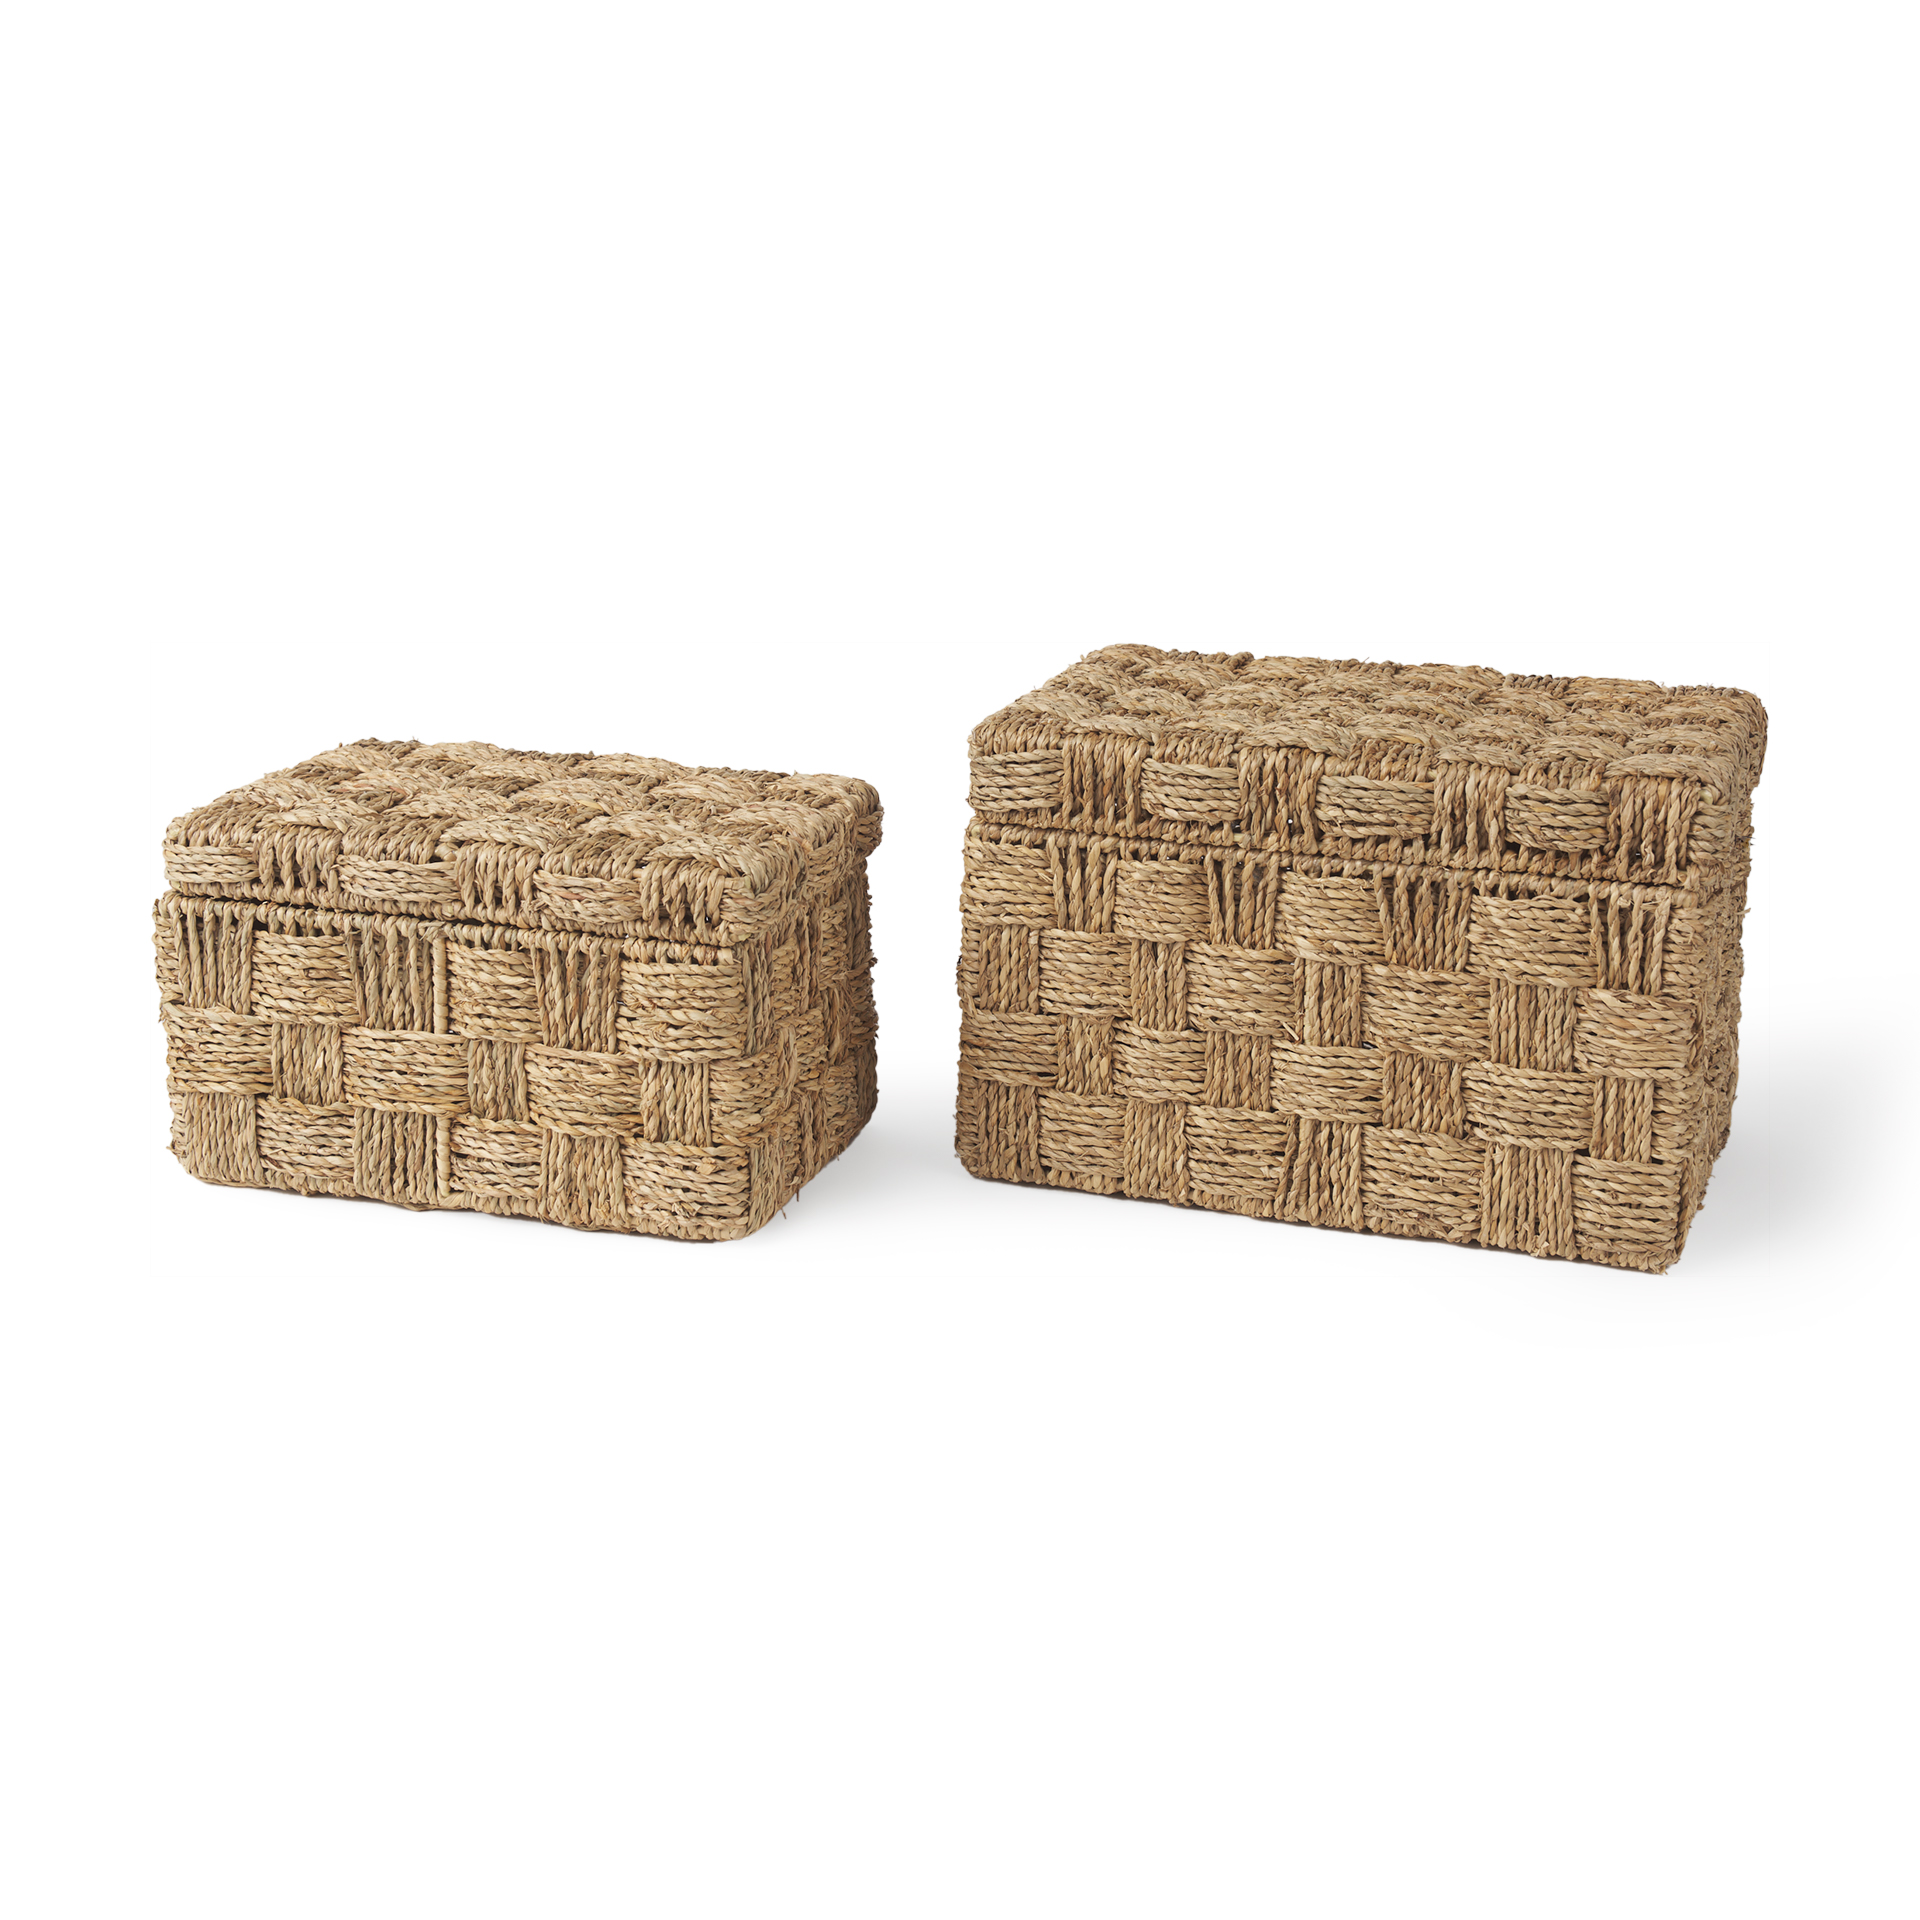 Seagrass | Set of 2